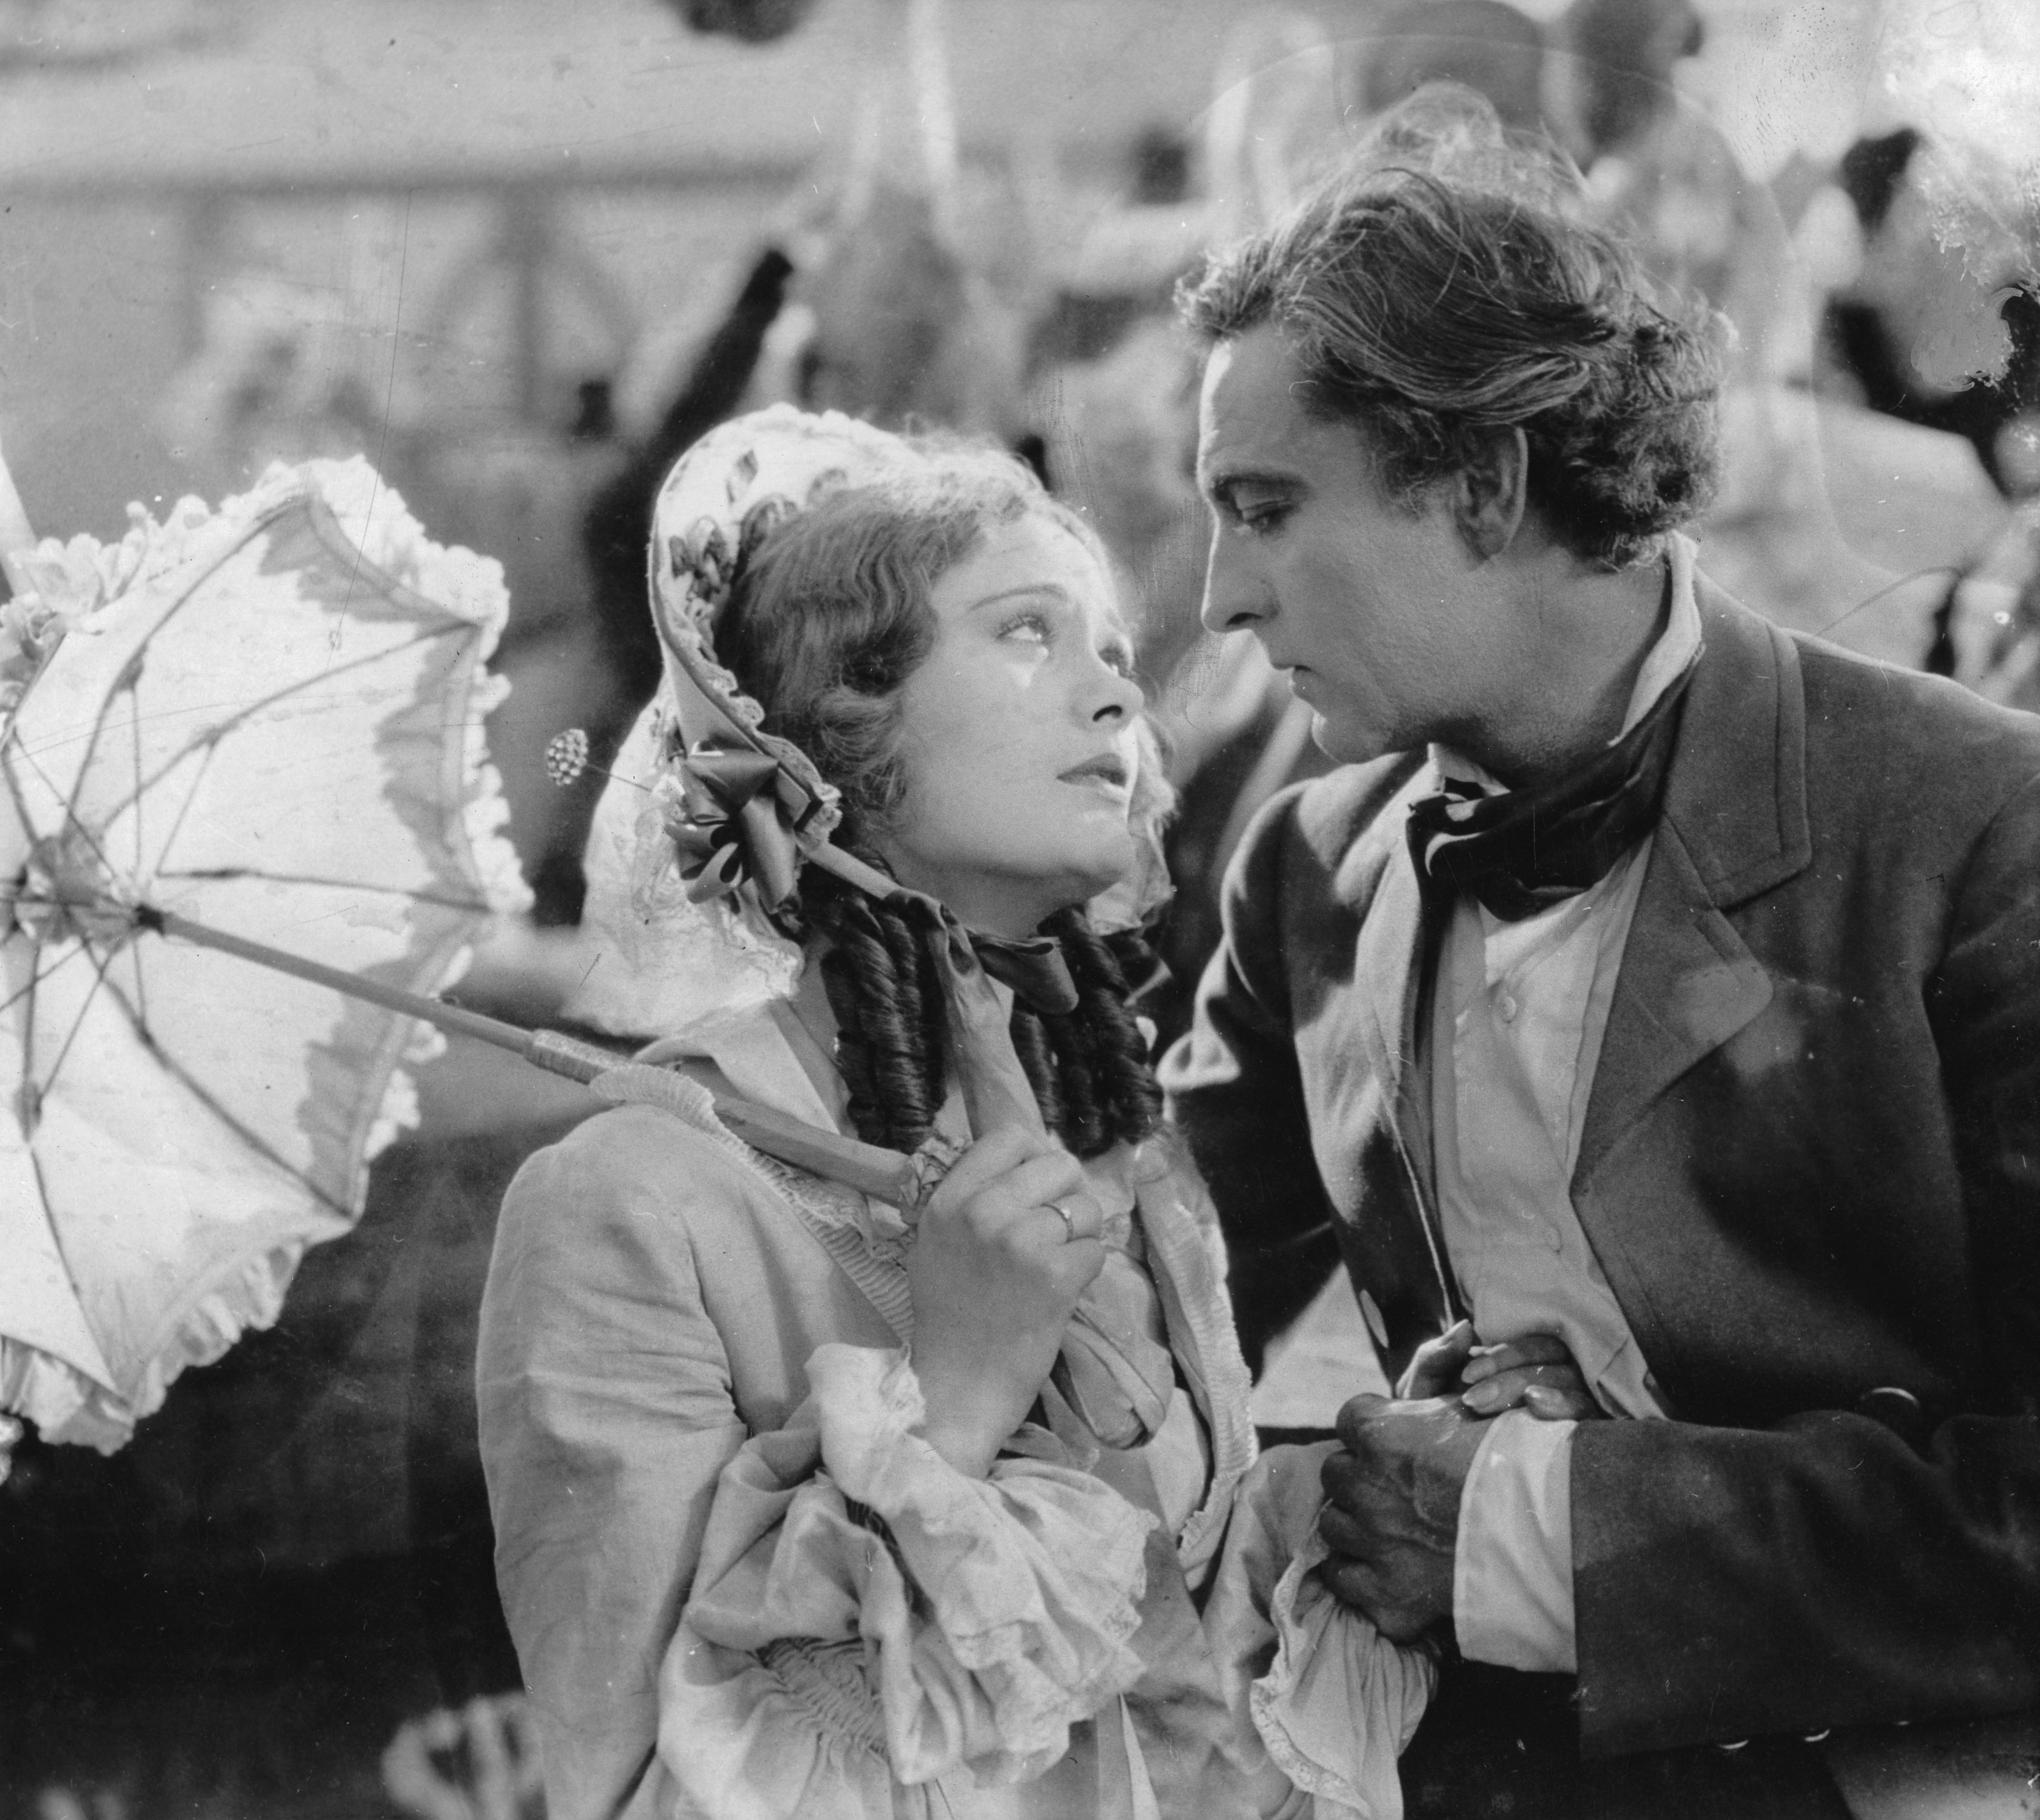 John Barrymore and Dolores Costello in a scene from "Sea Beast" circa 1926 | Source: Getty Images